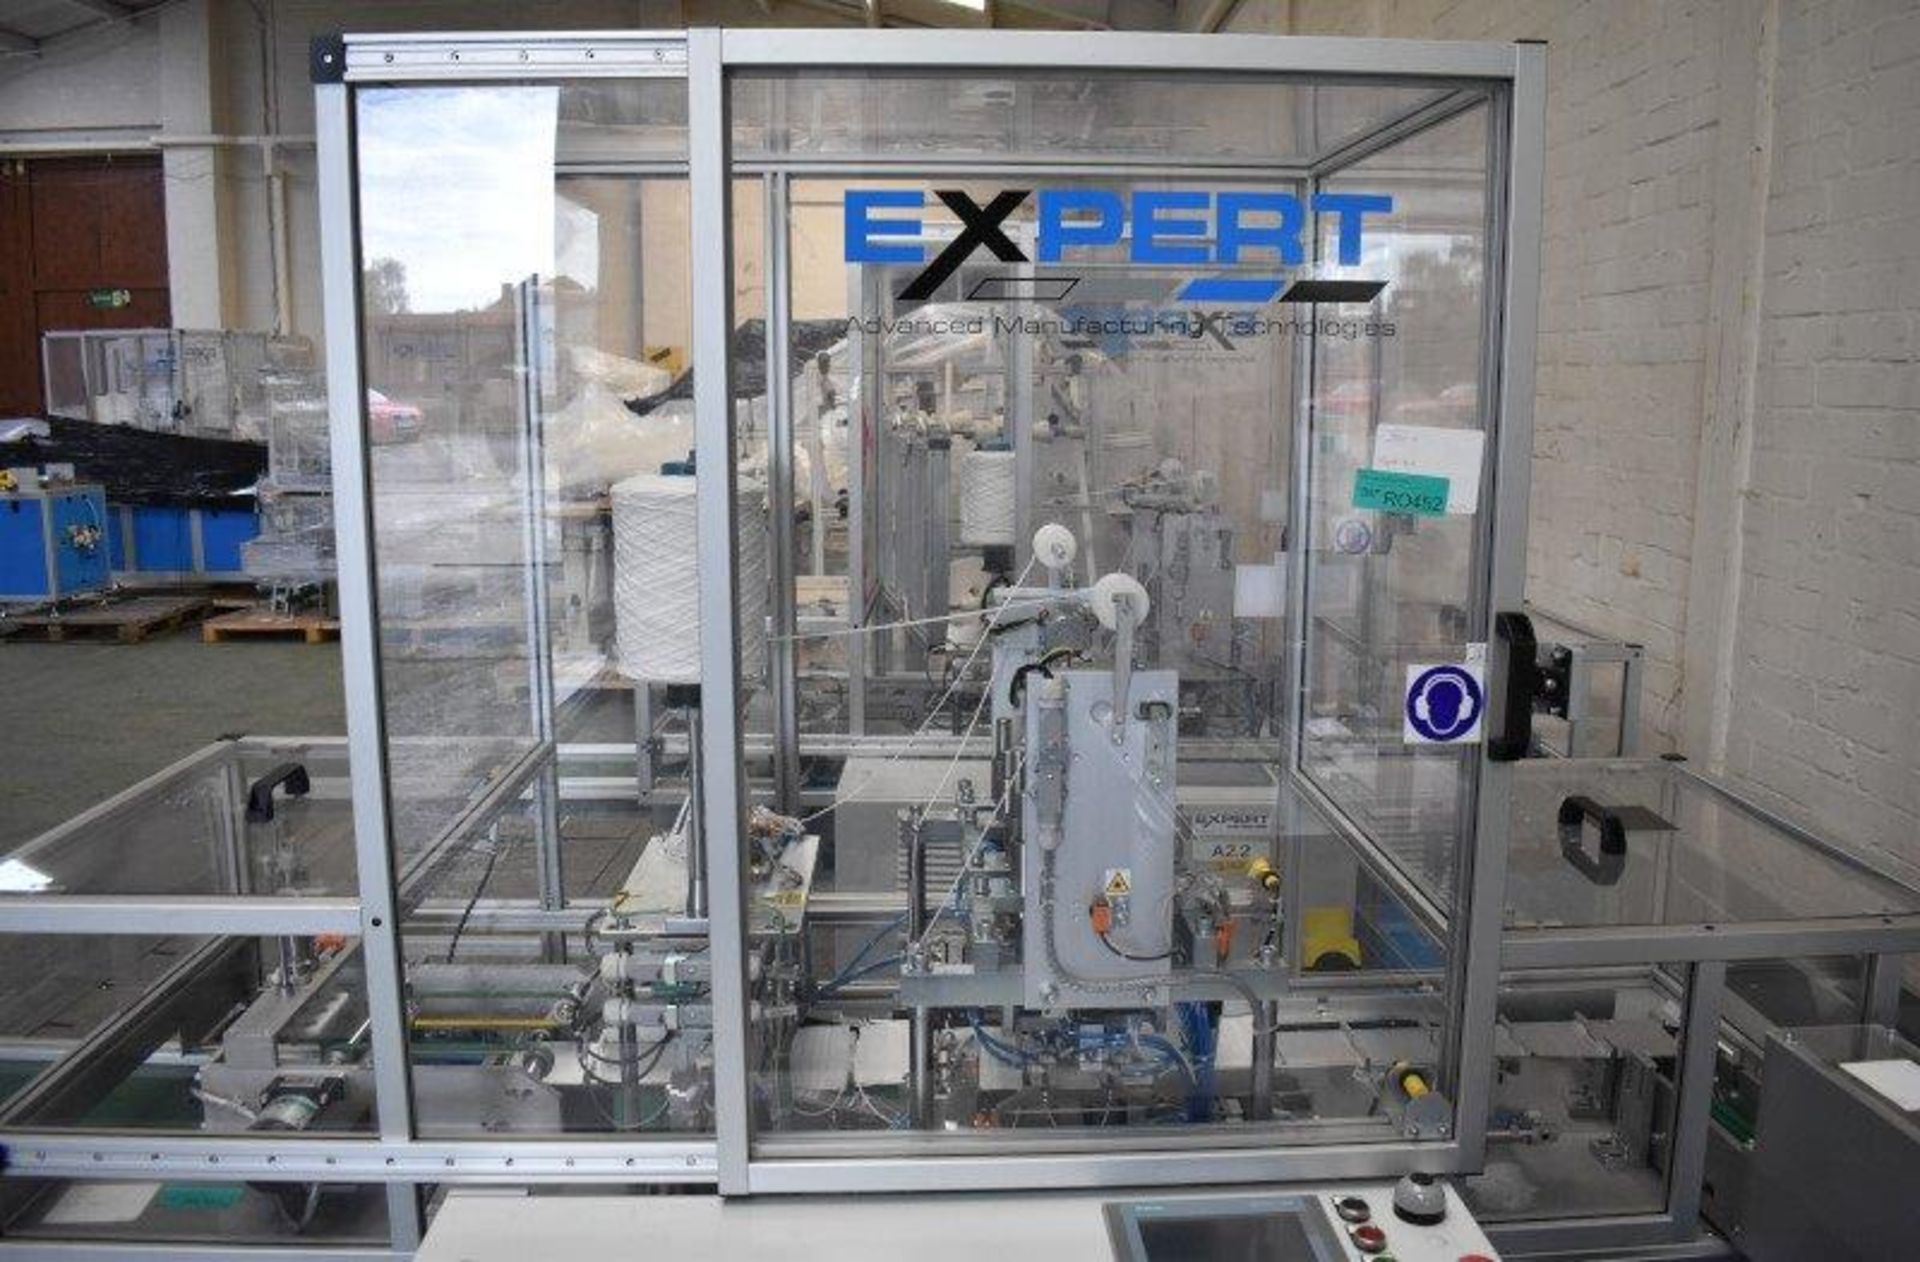 Expert fully automated Mask Making Machine including an Ilapak Smart flow wrapping packaging machine - Image 7 of 28